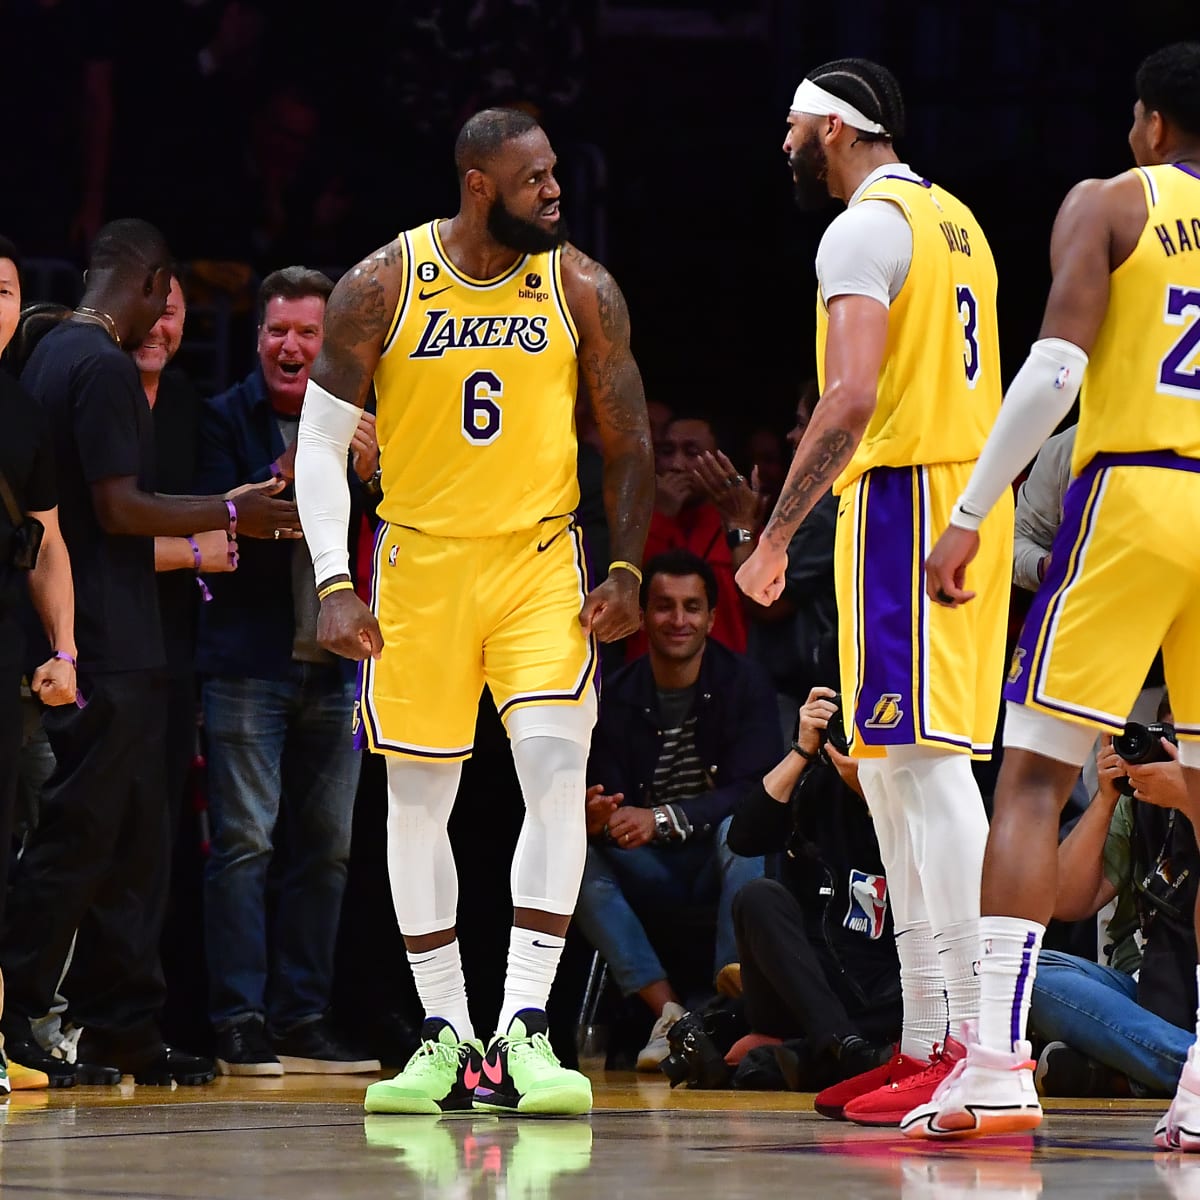 Lakers sing Whoop that trick and hit the griddy after